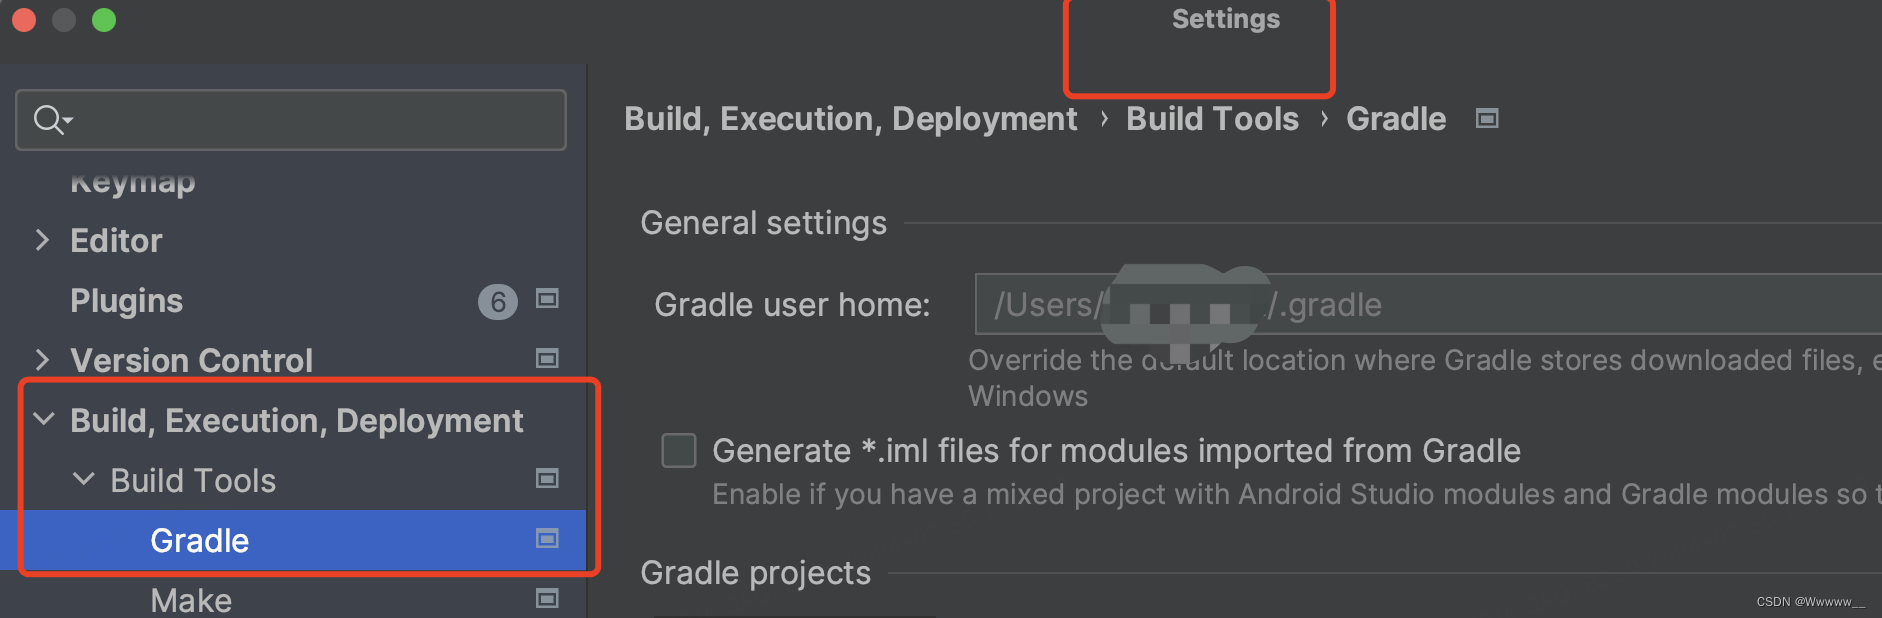 Android Studio | sync时报错到<span style='color:red;'>Gradle</span>，<span style='color:red;'>显示</span>Connection timed out<span style='color:red;'>的</span><span style='color:red;'>解决</span>方案